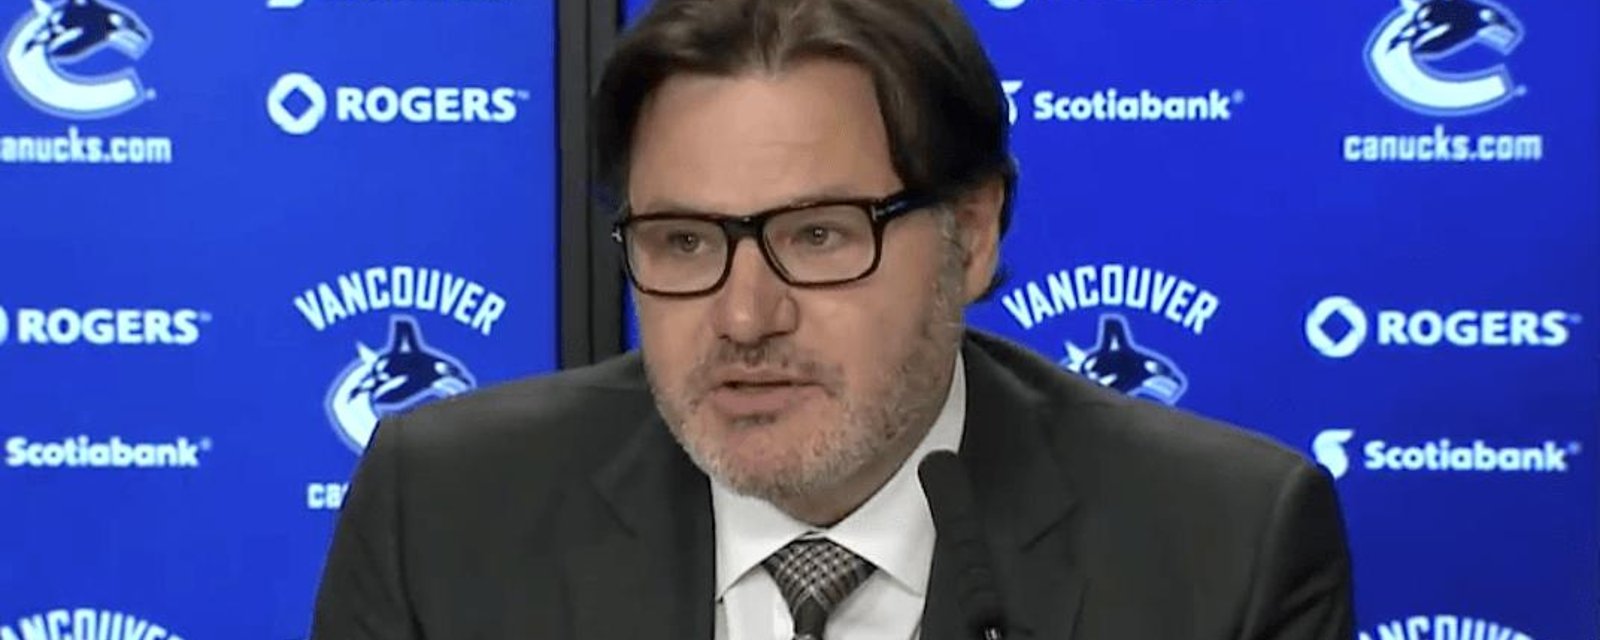 Canucks owner’s family in hot water after workers expose harassment and threats to media! 